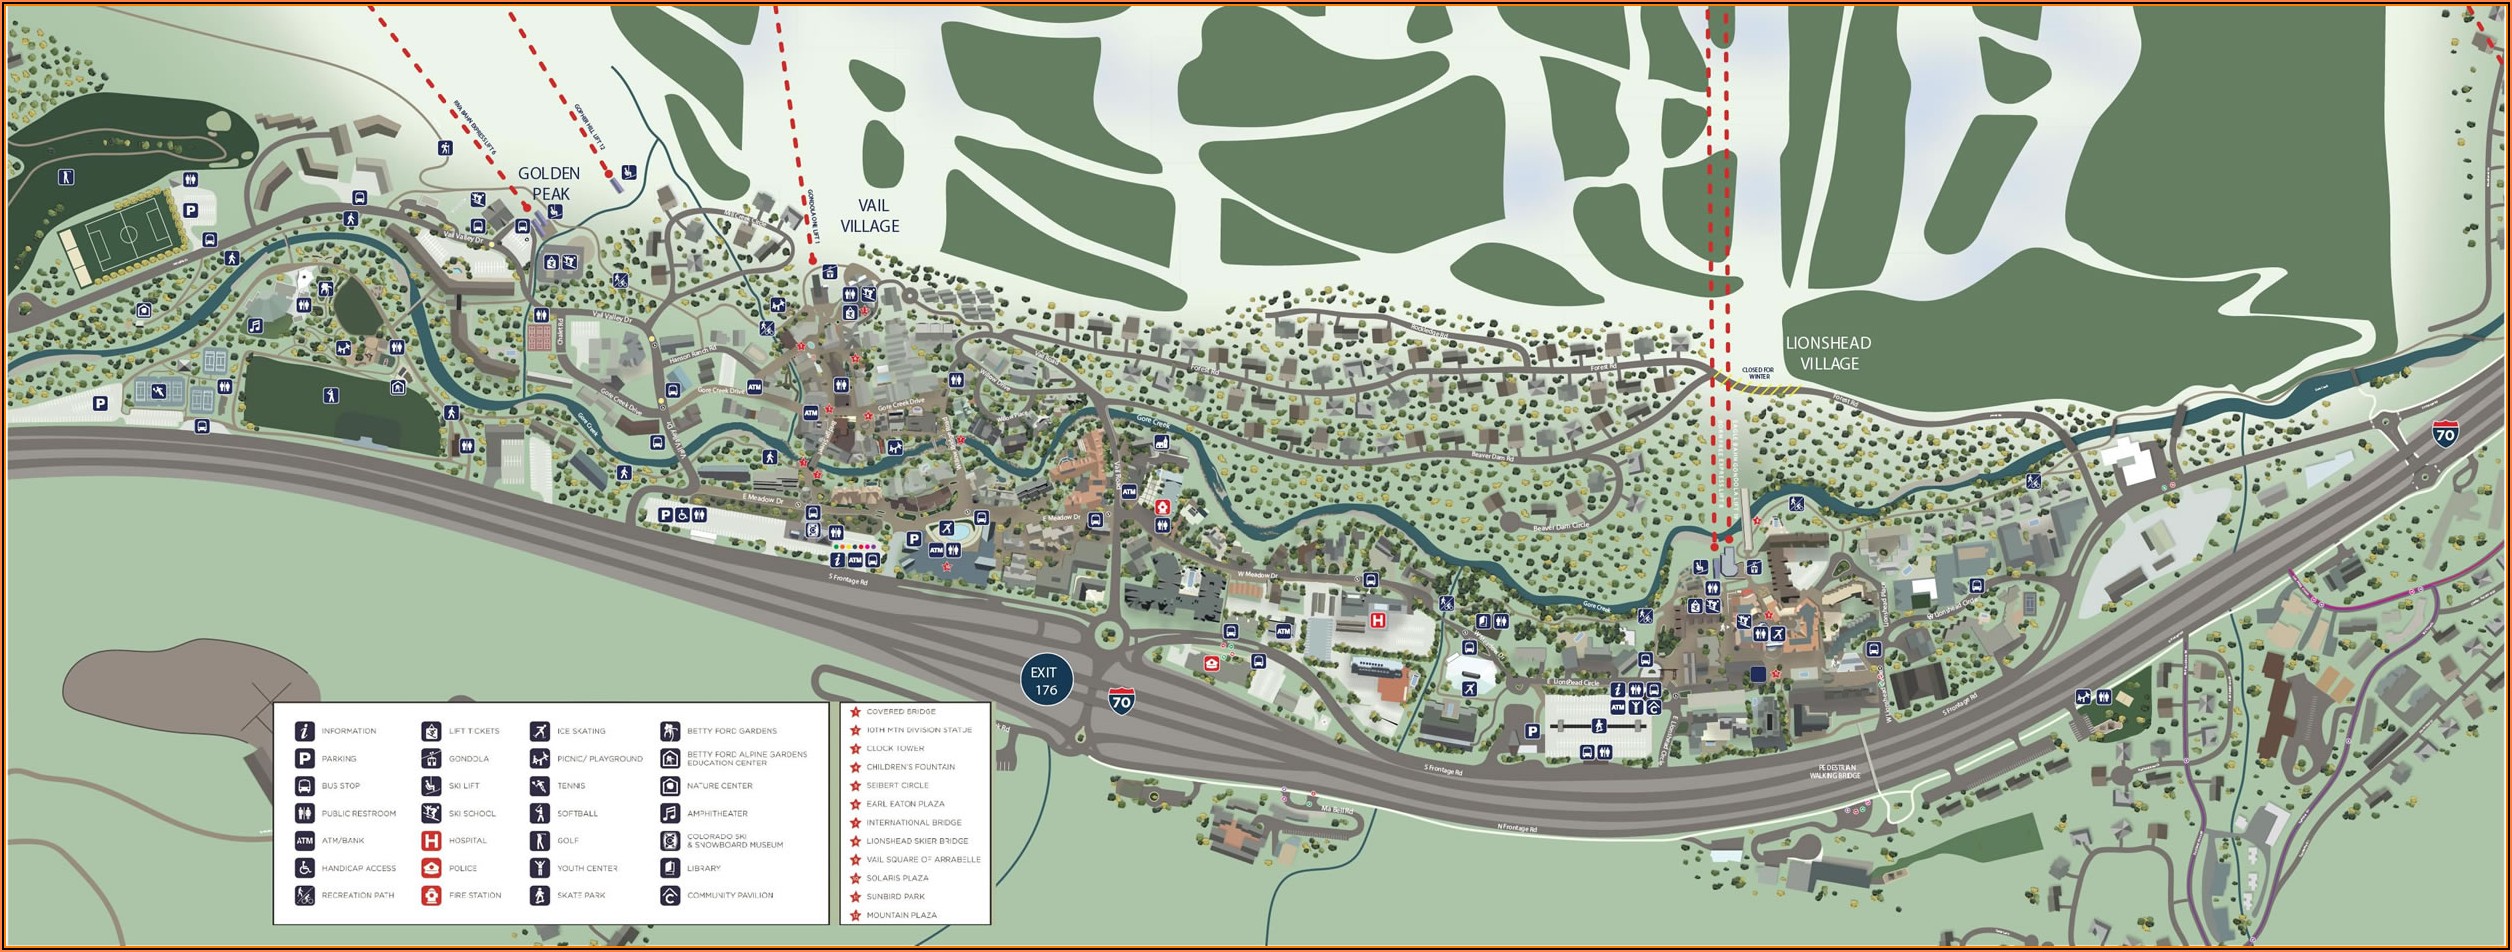 Map Of Vail Village Lodging